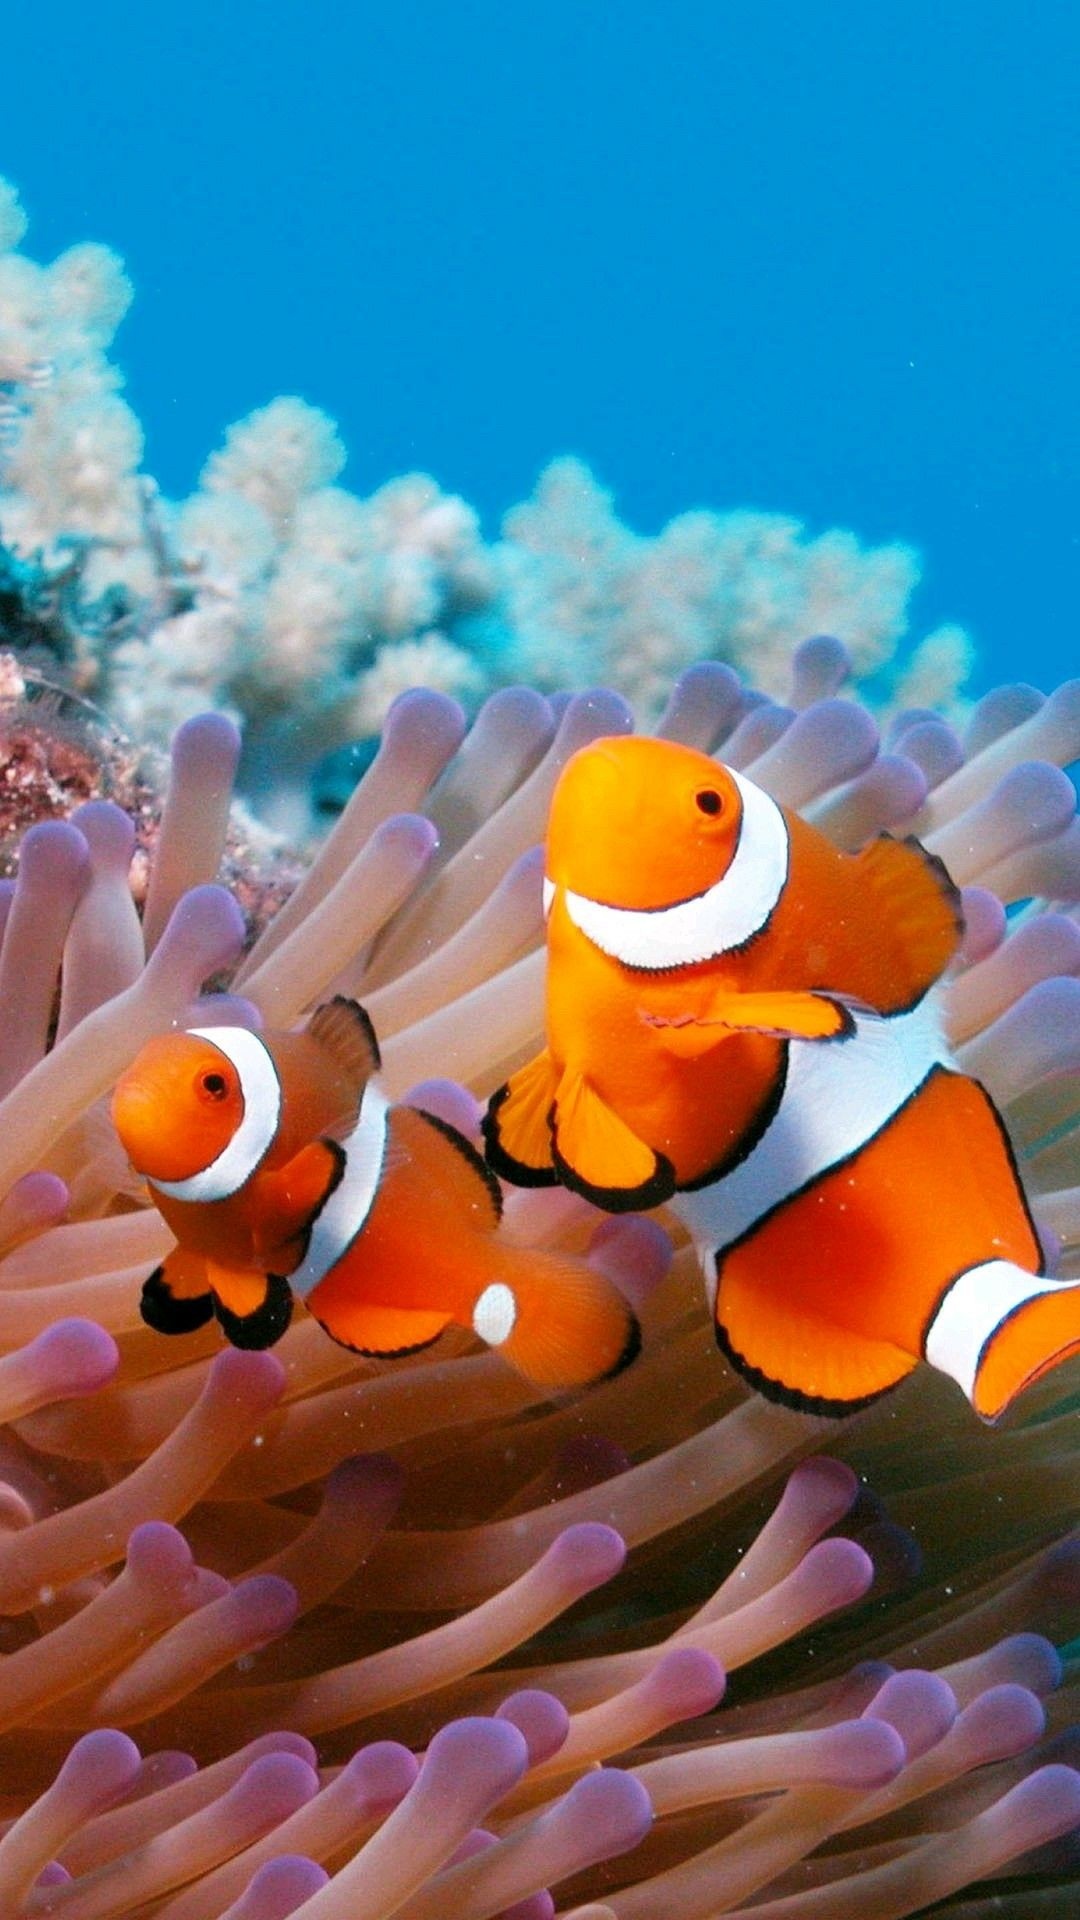 Clown fish, Underwater photography, Colorful fins, Tropical fish, 1080x1920 Full HD Handy